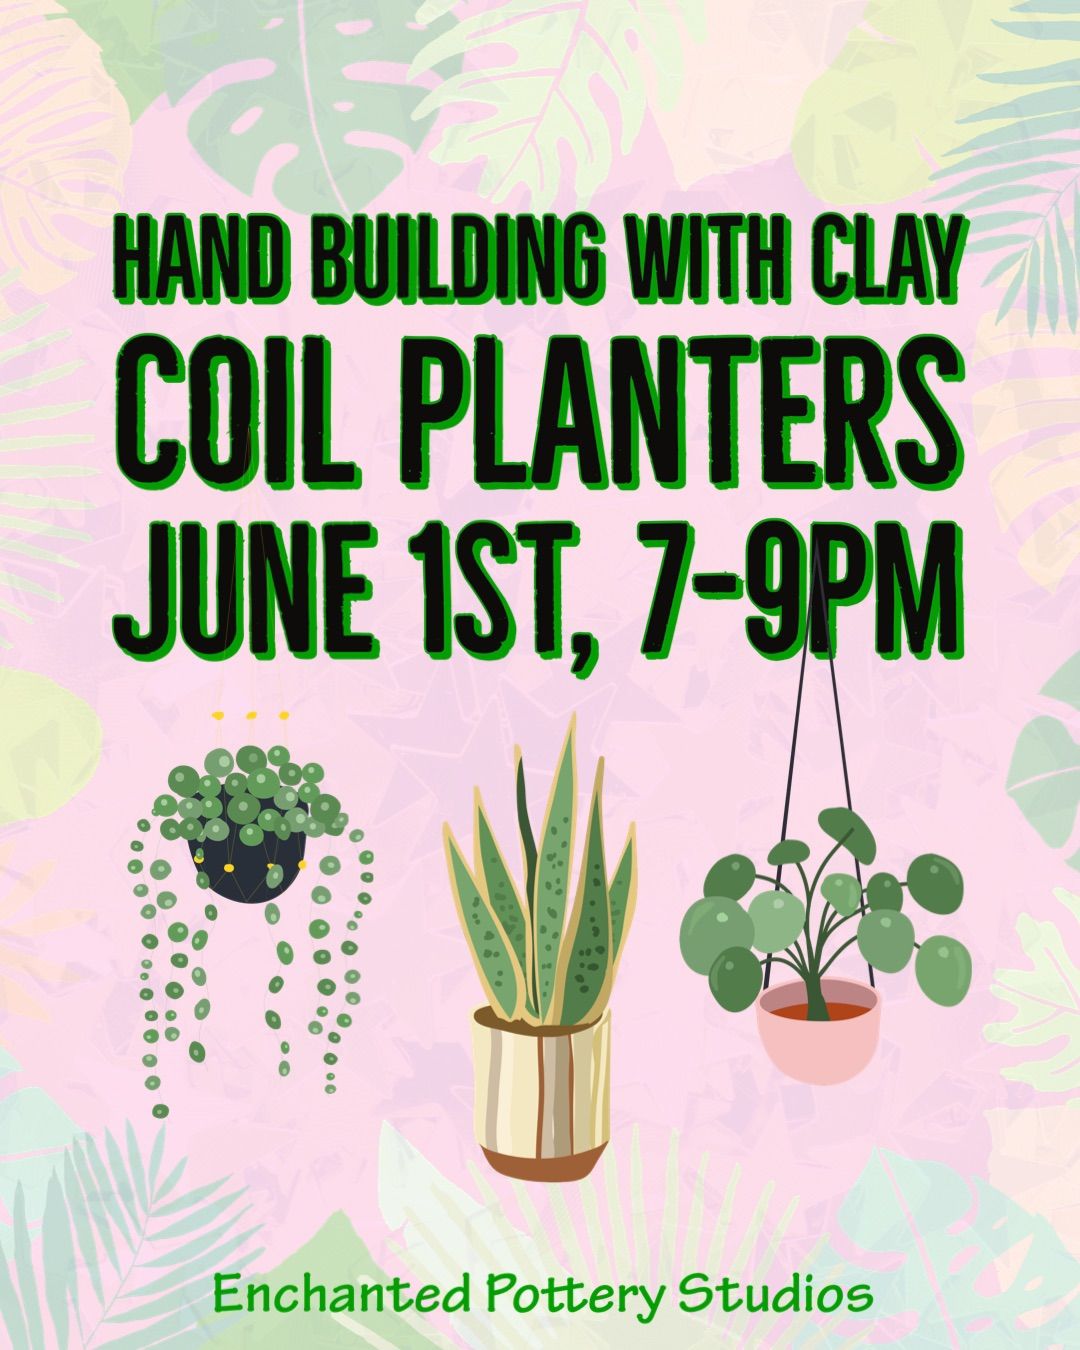 EPS Hand Building With Clay Planters